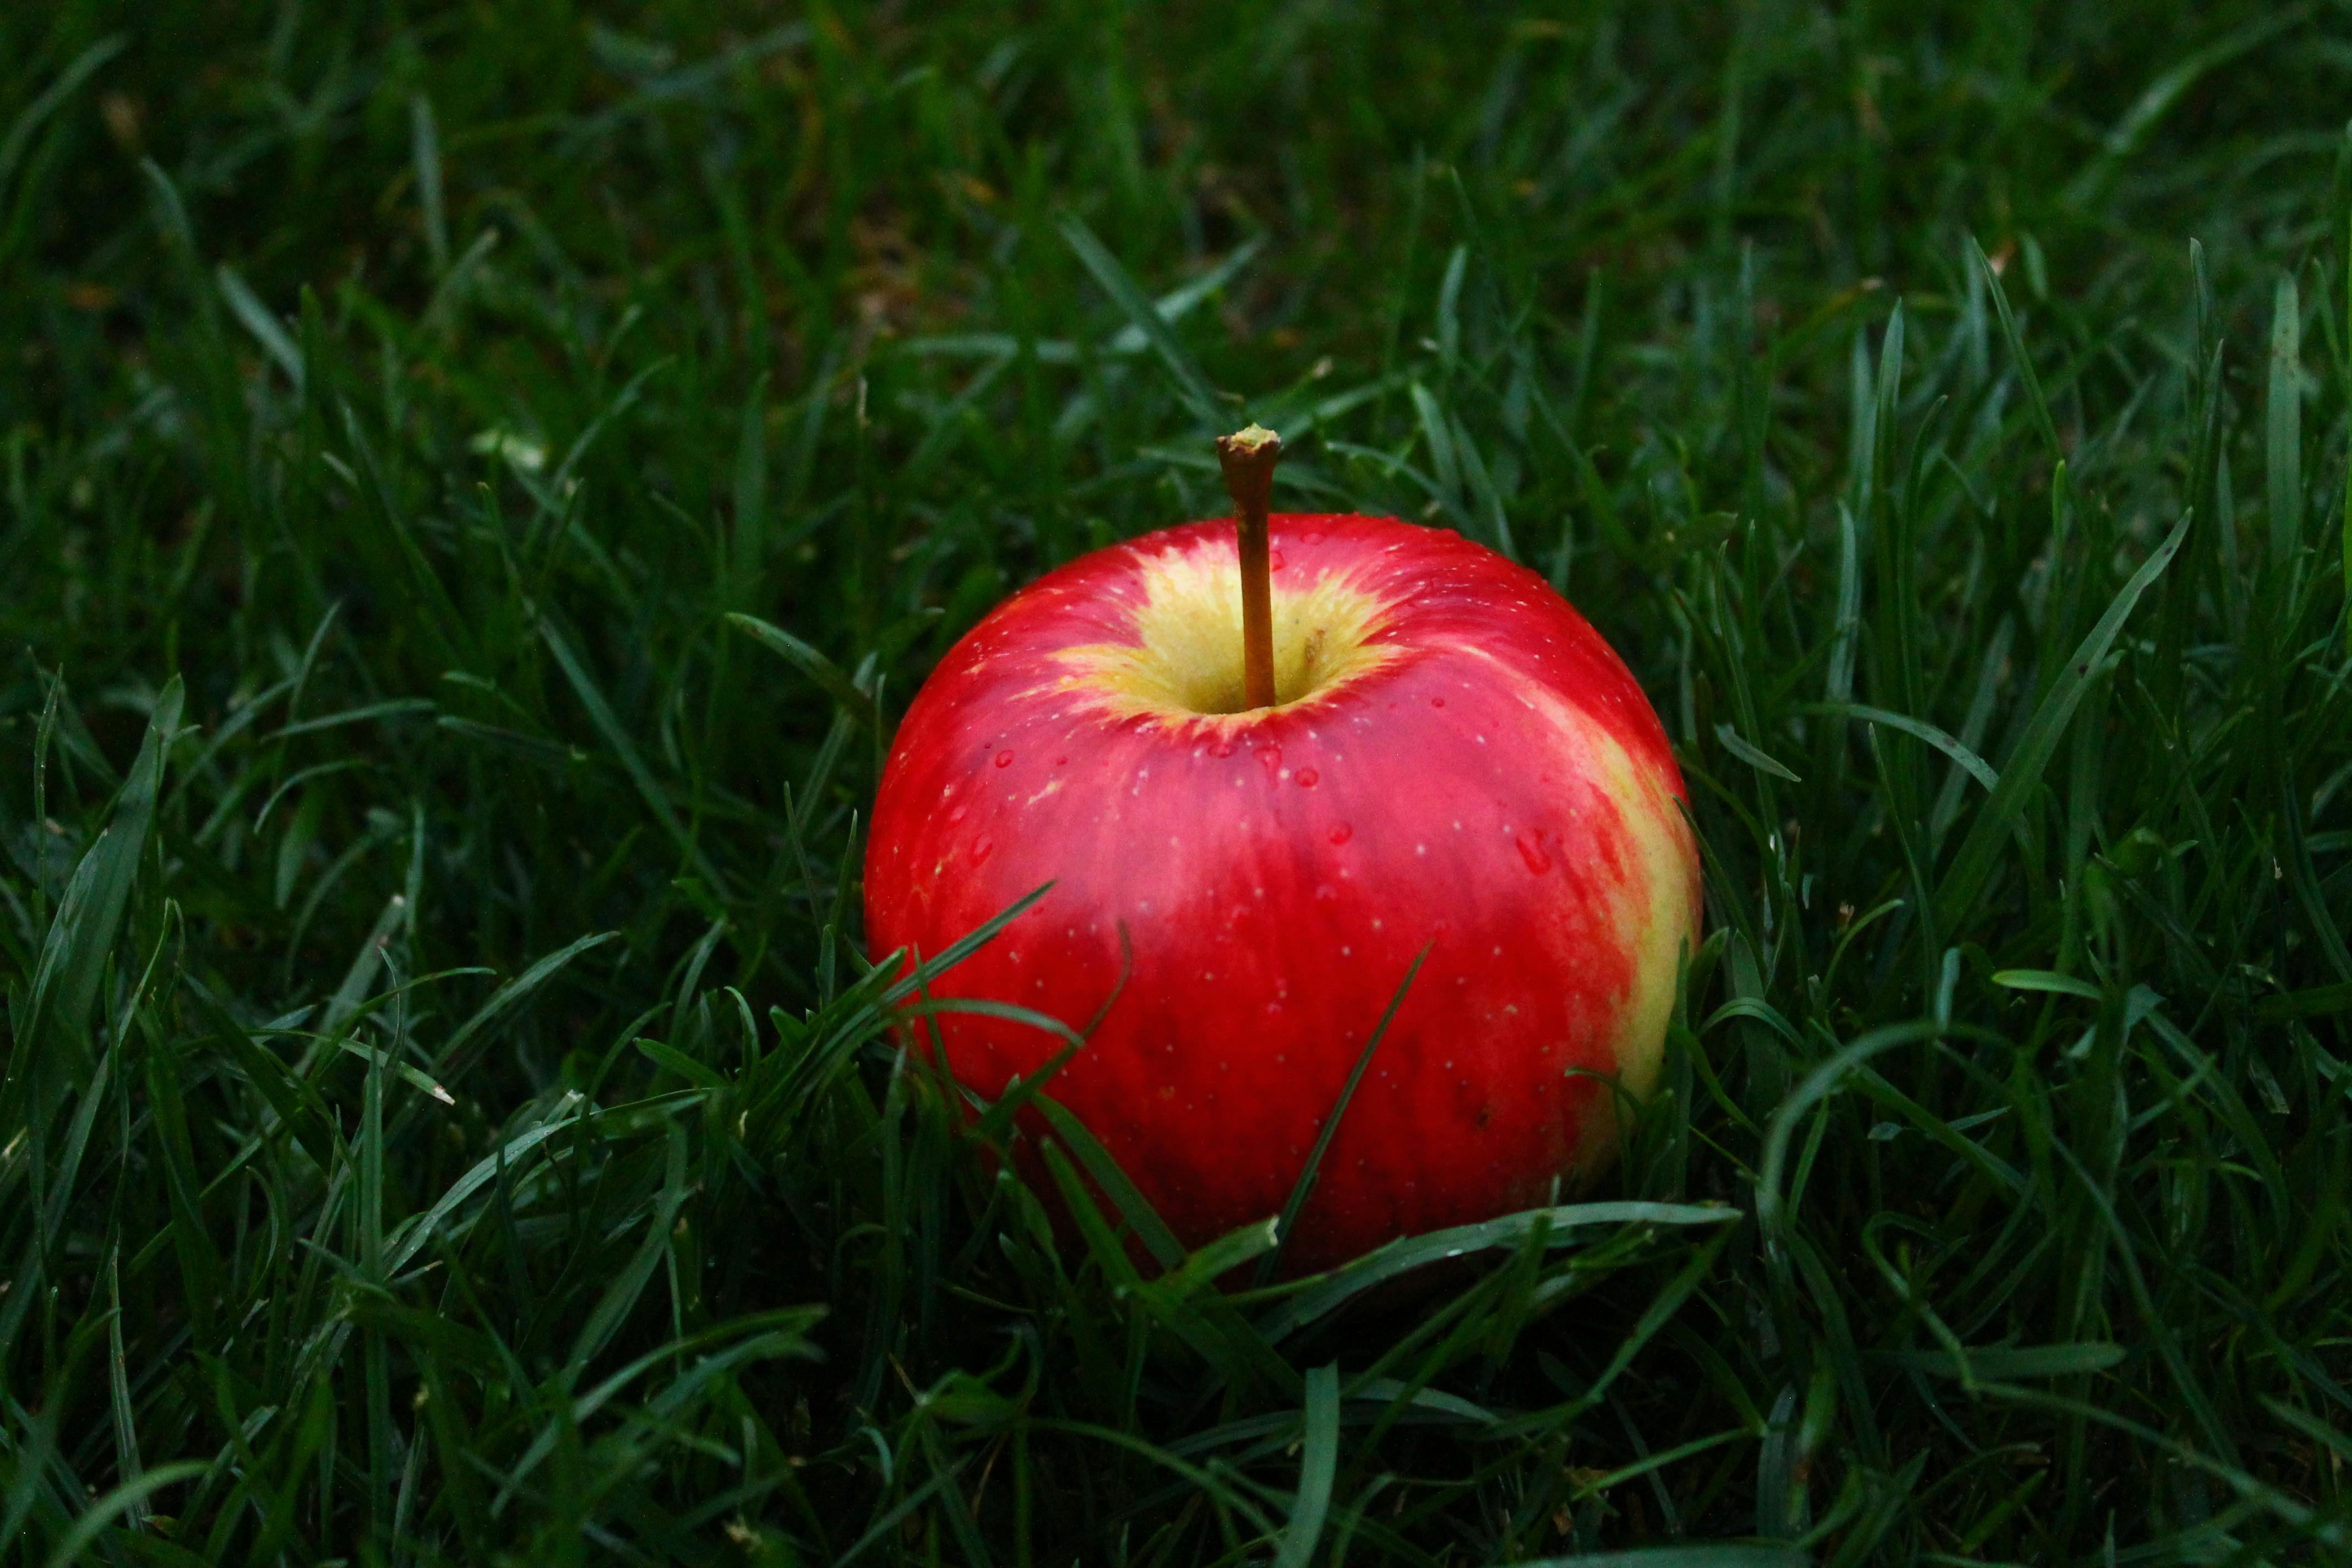 Image of a beautiful apple in the grass